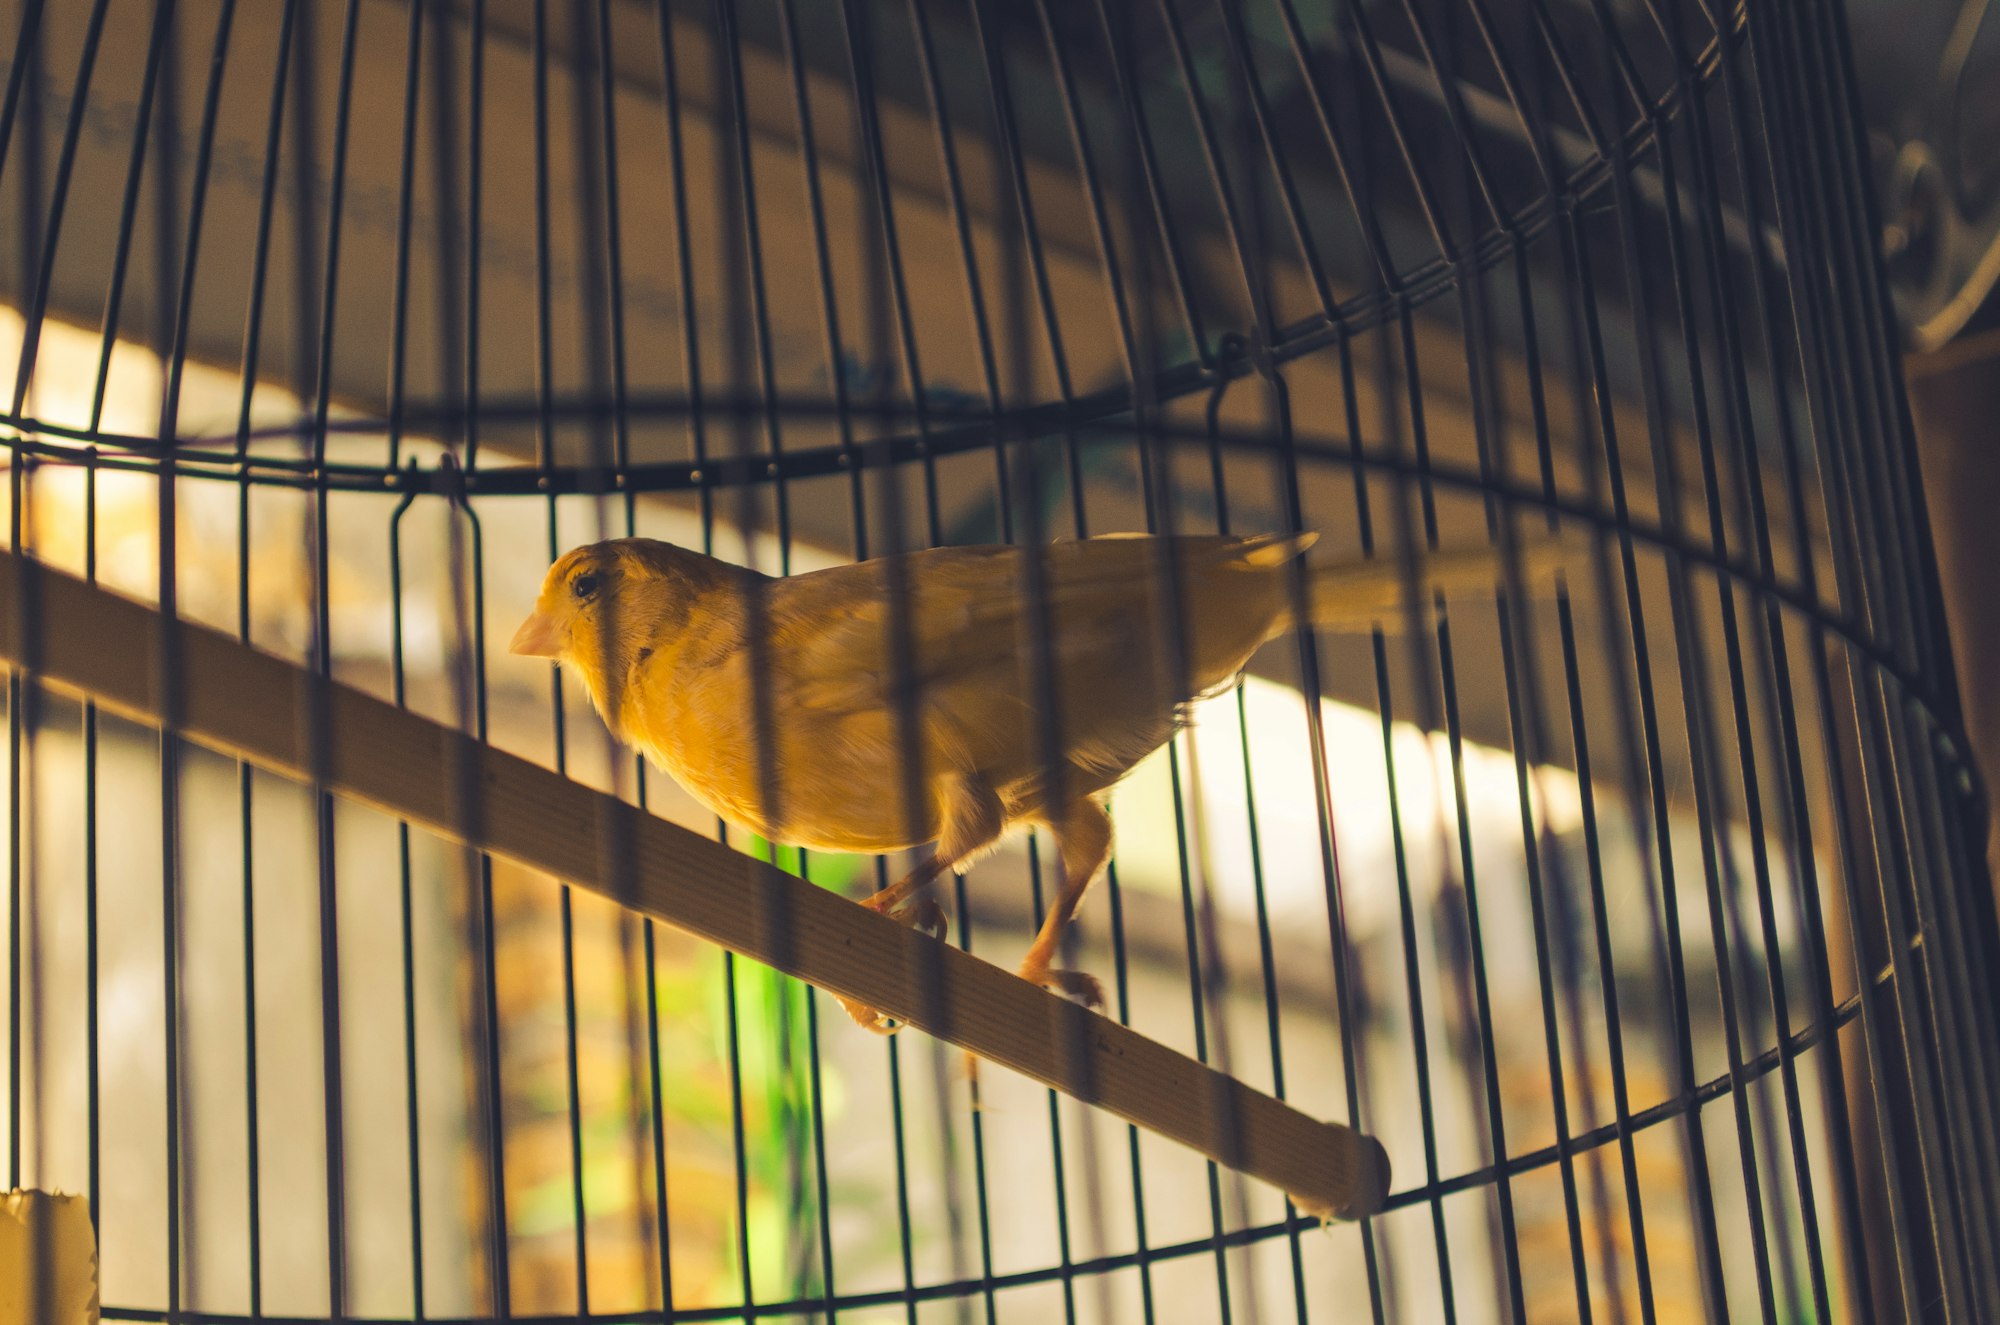 A photo of a small yellow canary bird in a cage